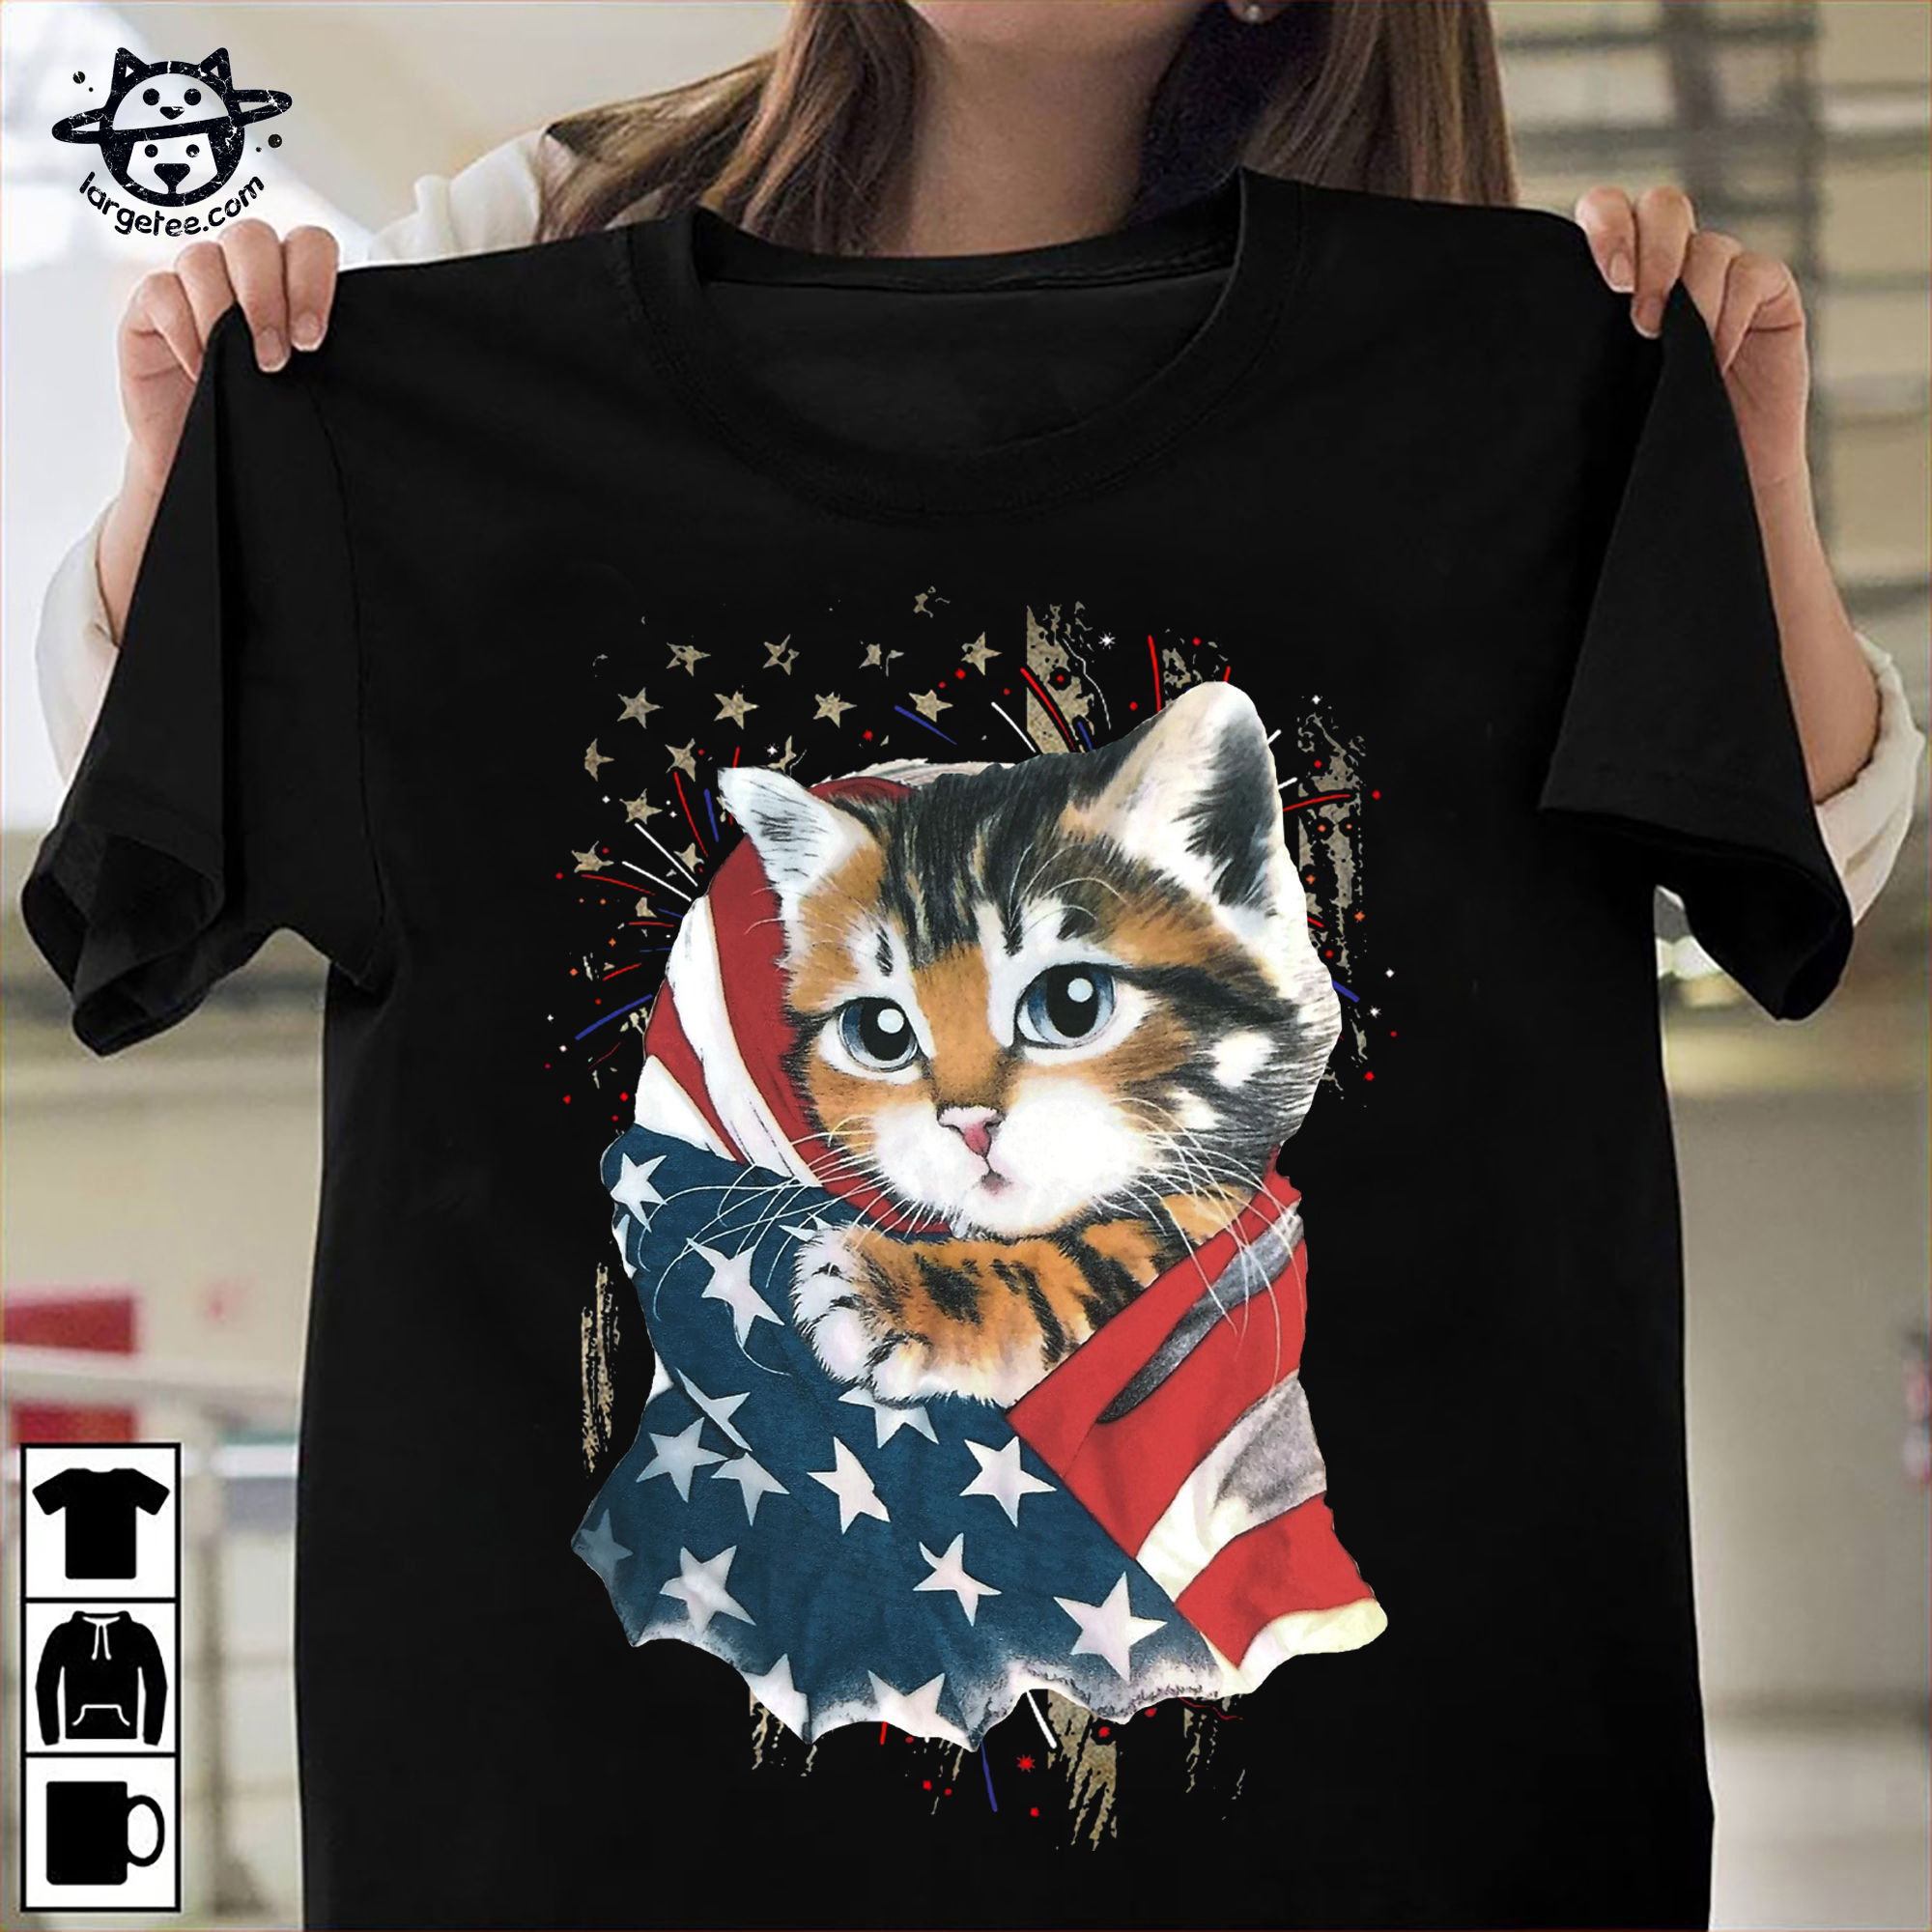 Kitty cat and America flag - Cat lover